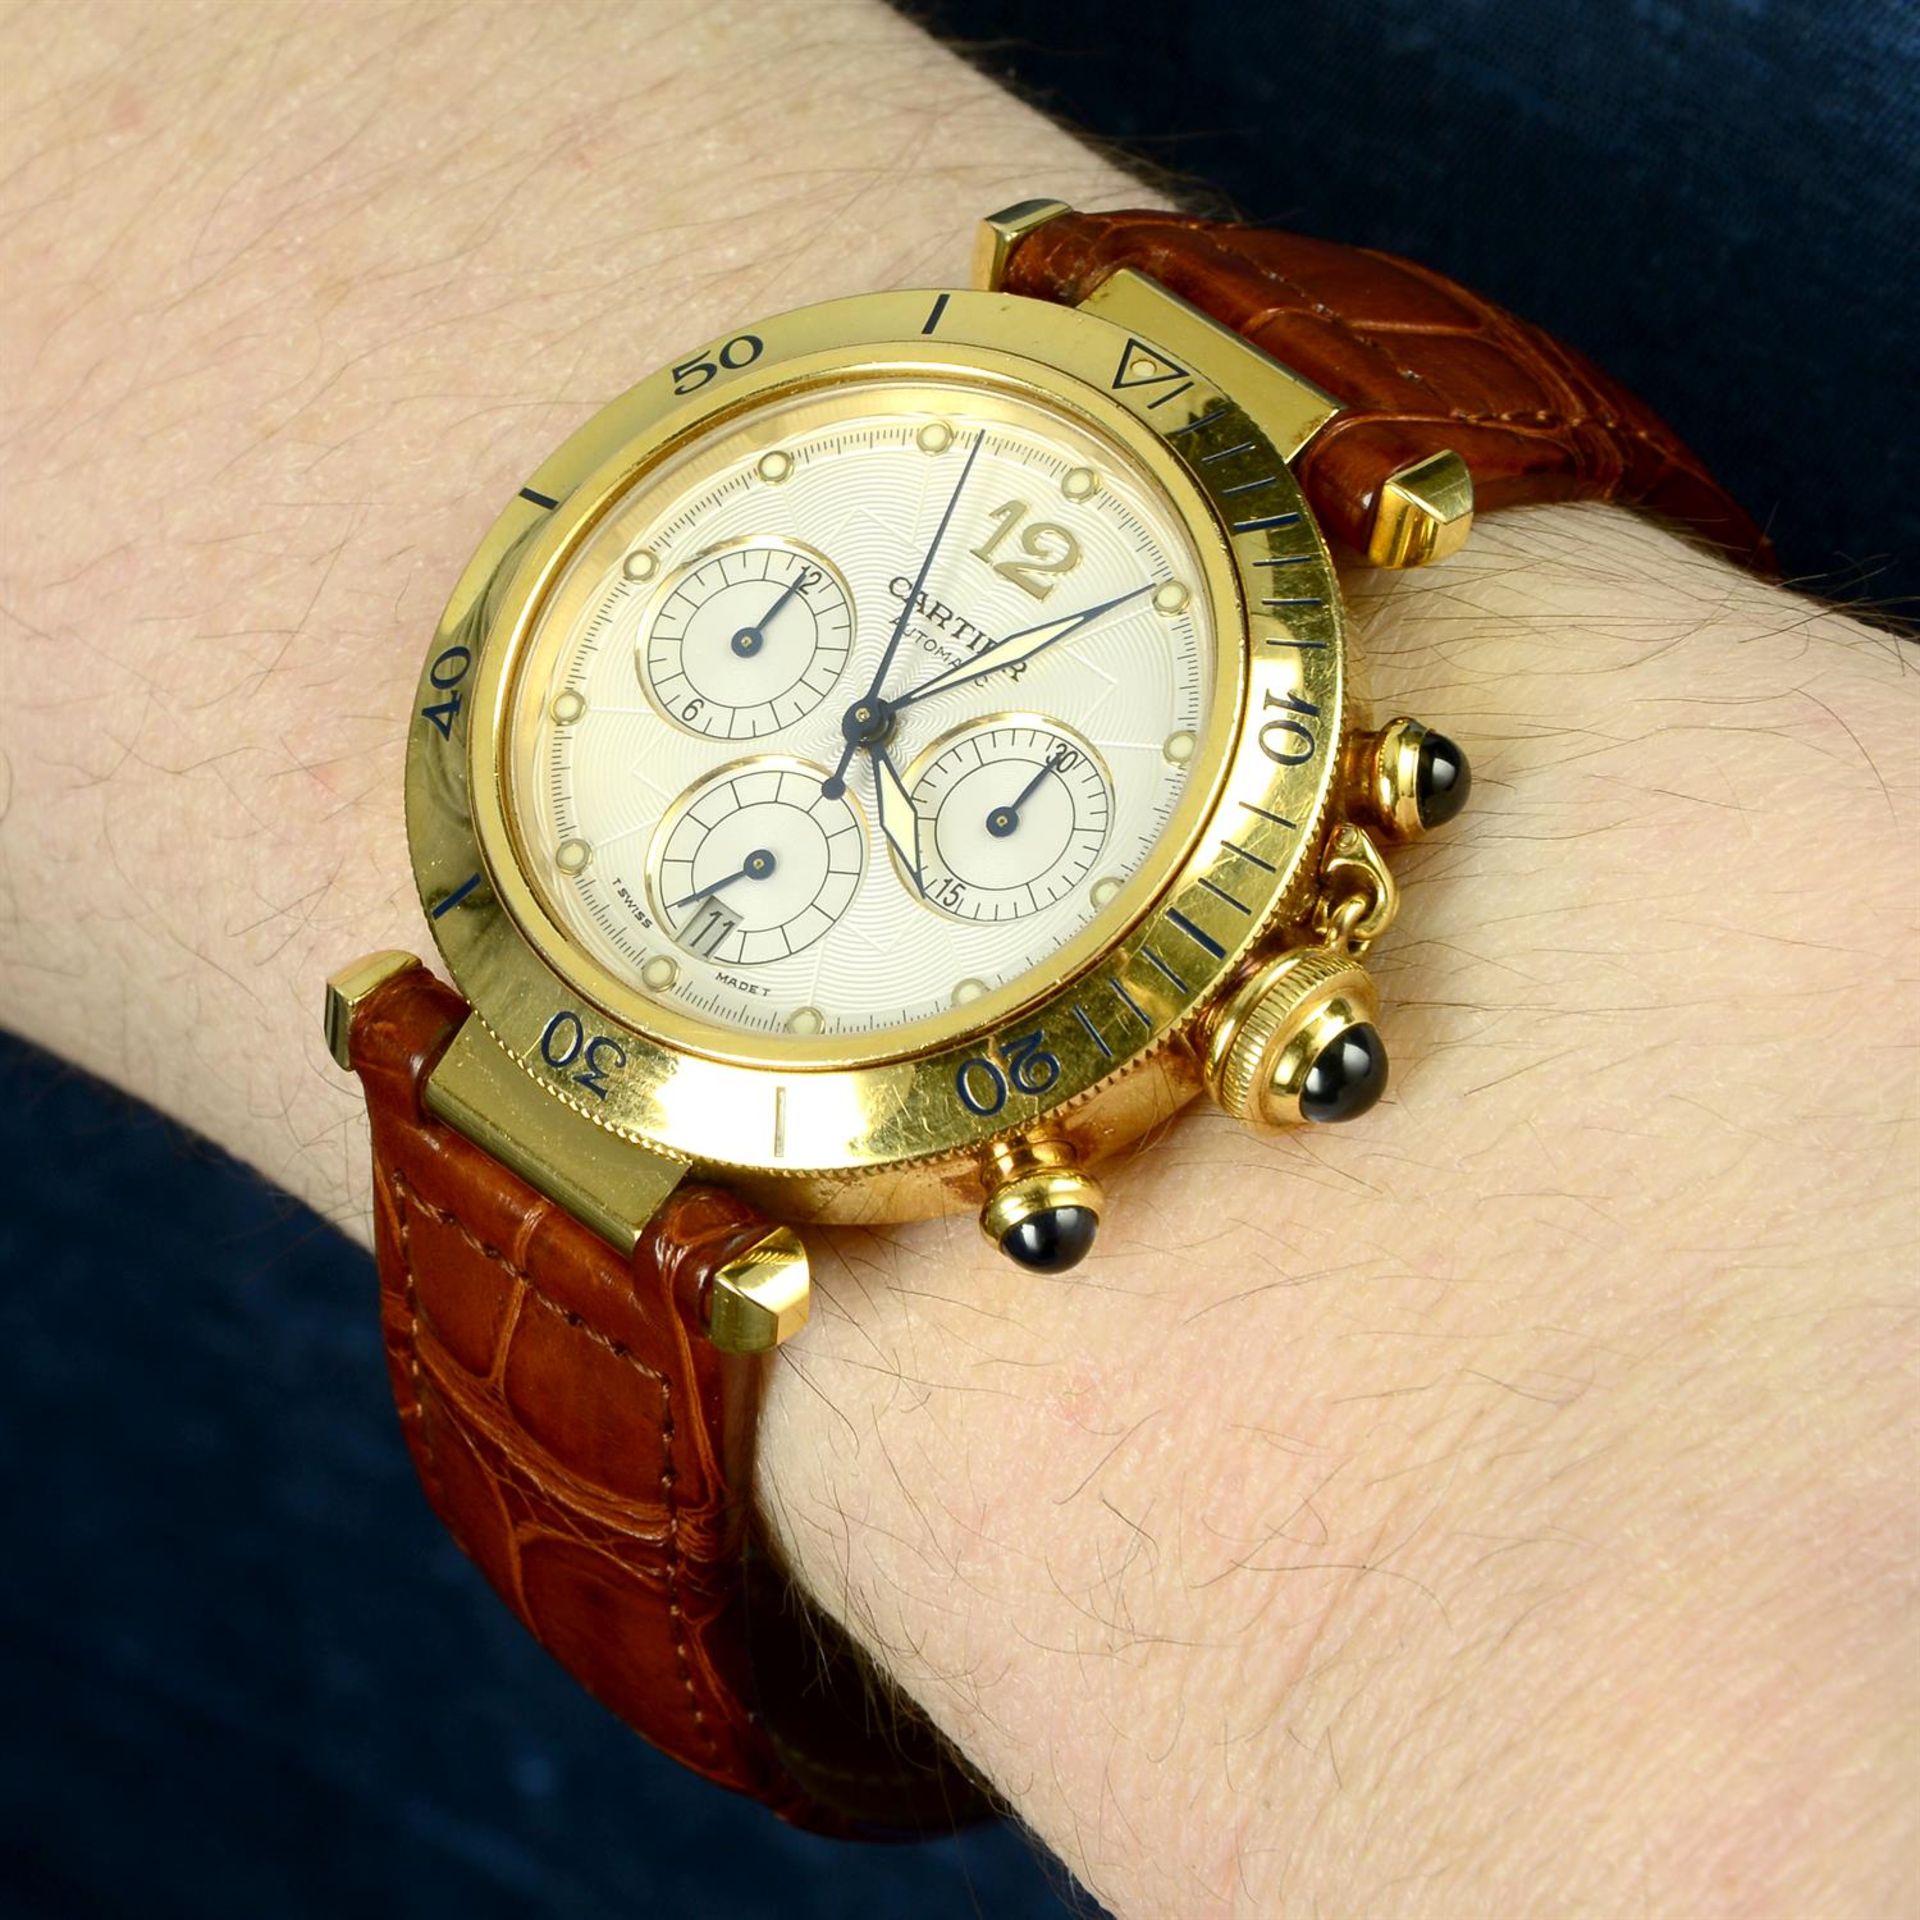 CARTIER - an 18ct yellow gold Pasha chronograph wrist watch, 38mm. - Image 6 of 6